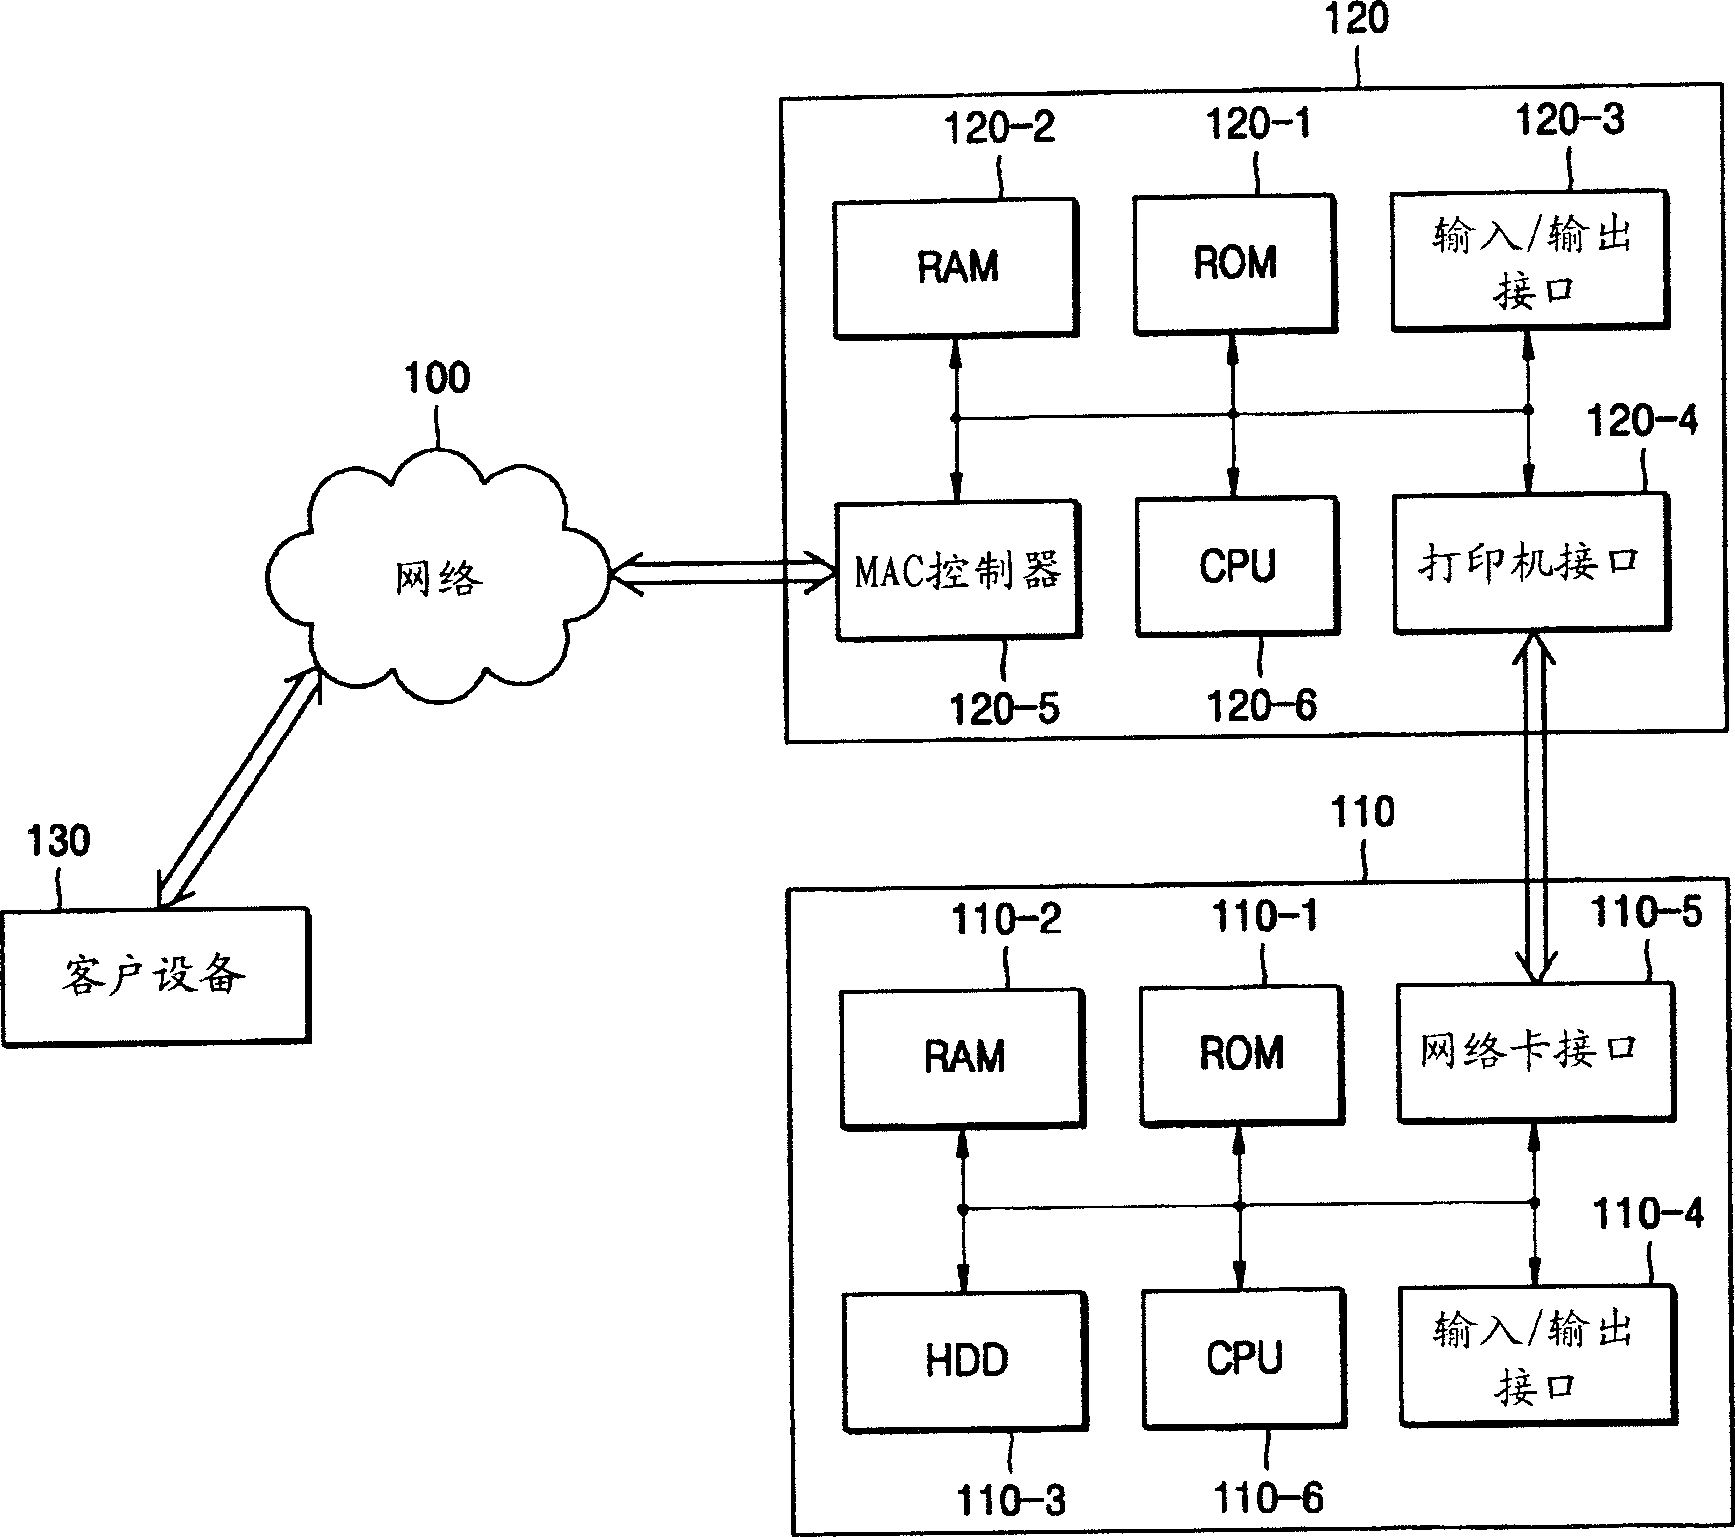 Apparatus and method for printing data using a server message block protocol